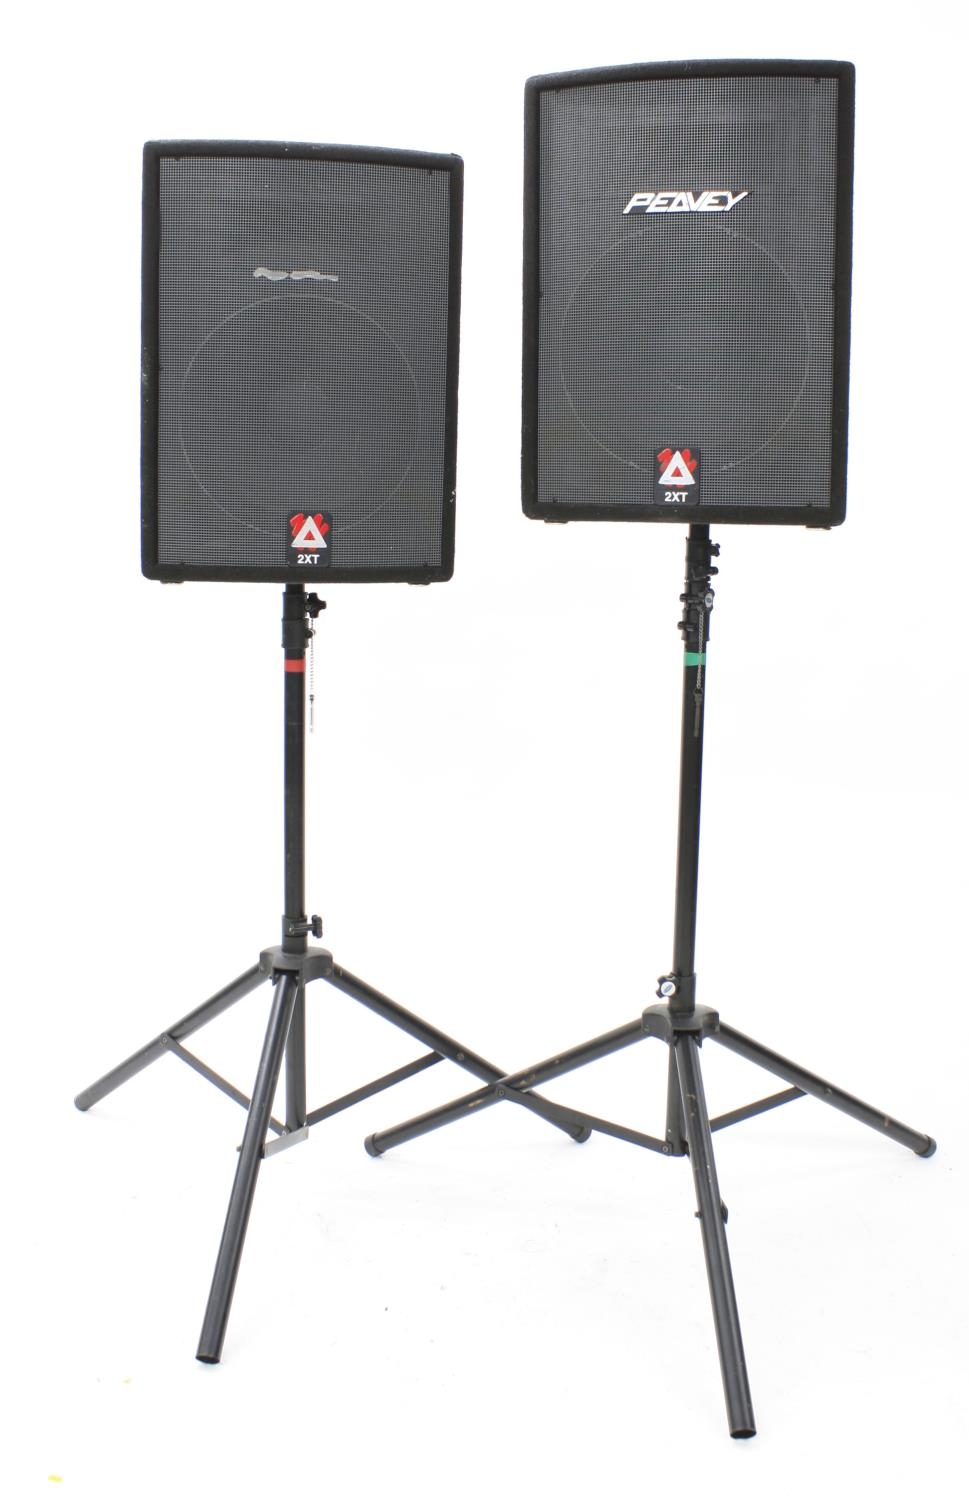 Pair of Peavey XT Series Hisys 2 XT PA speakers; together with a pair of Samil speaker stands